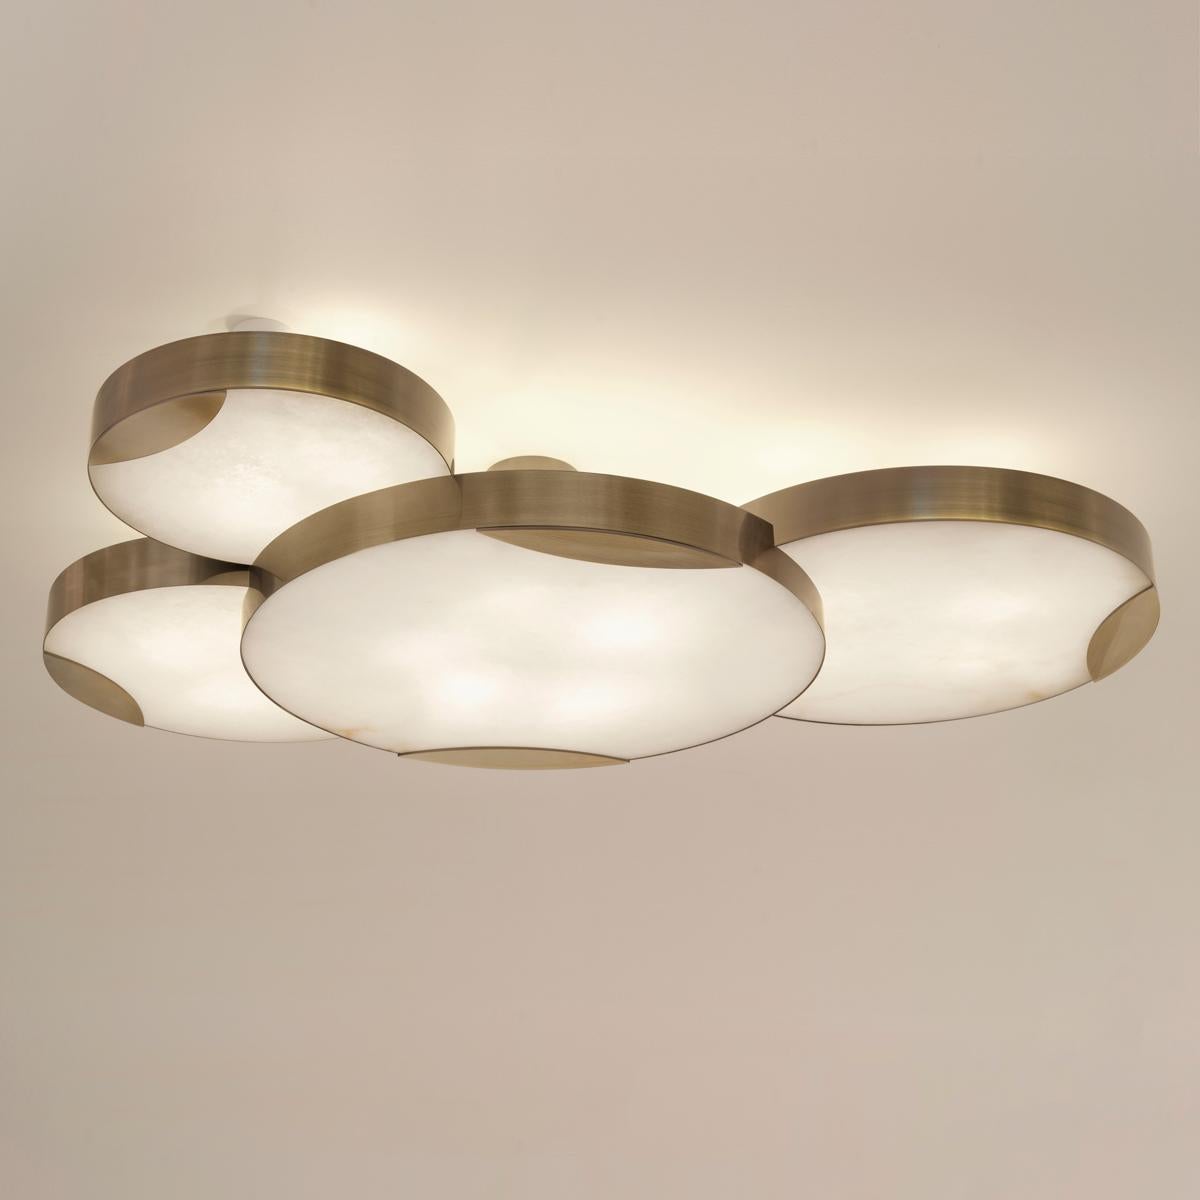 Cloud N.4 Ceiling Light by Gaspare Asaro-Satin Brass Finish For Sale 2